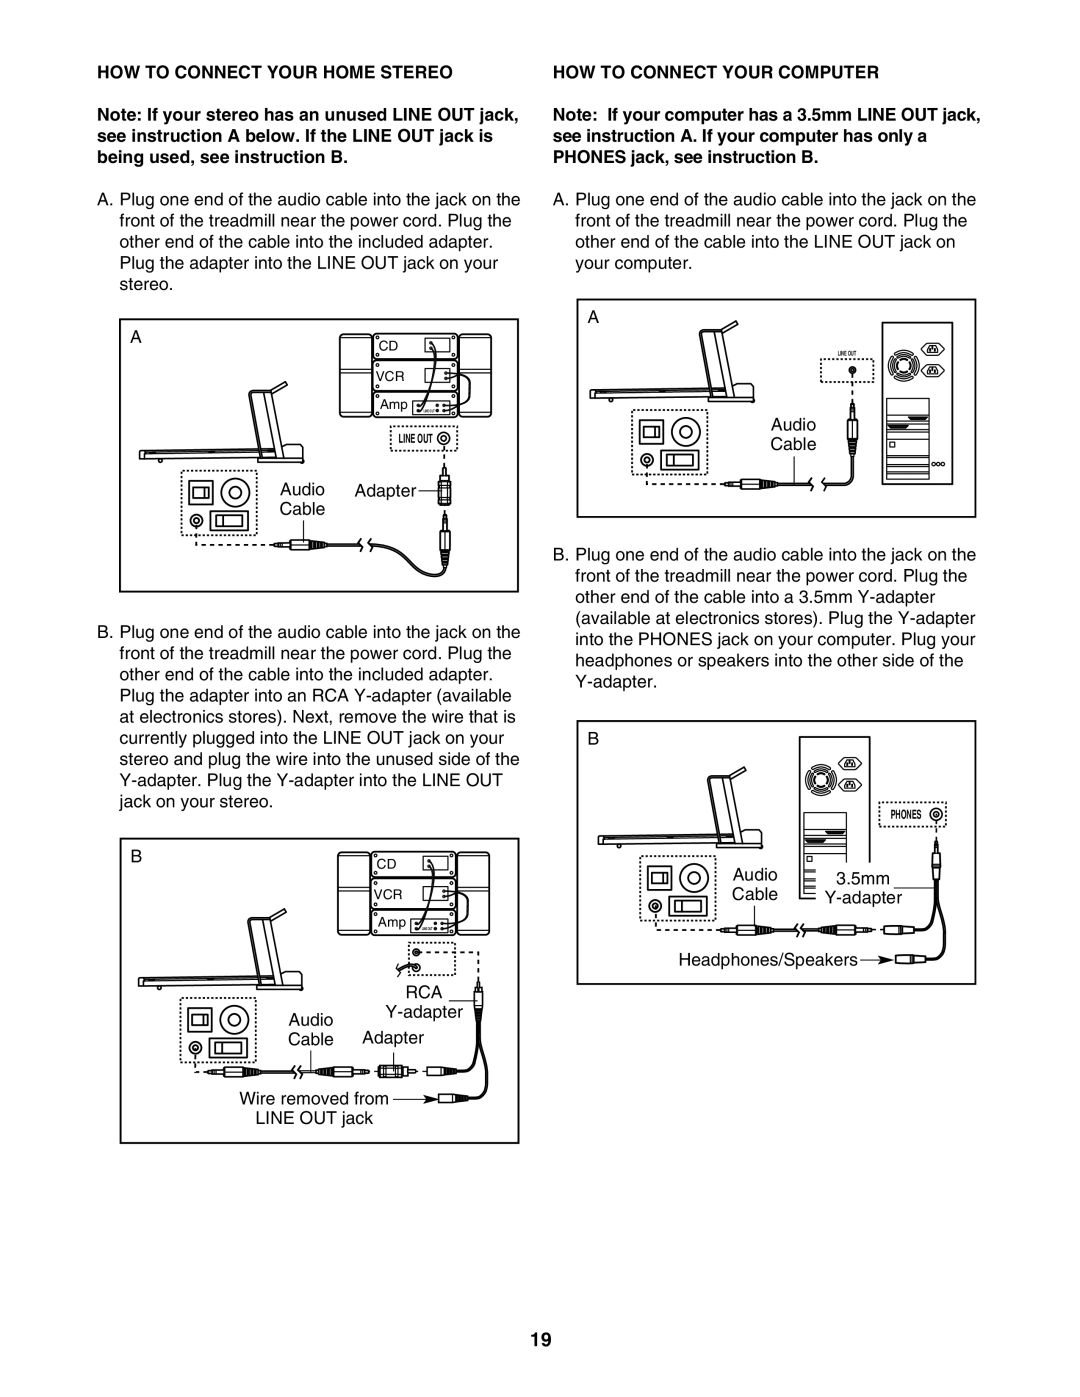 Image IMTL515041 user manual HOW to Connect Your Home Stereo, HOW to Connect Your Computer 